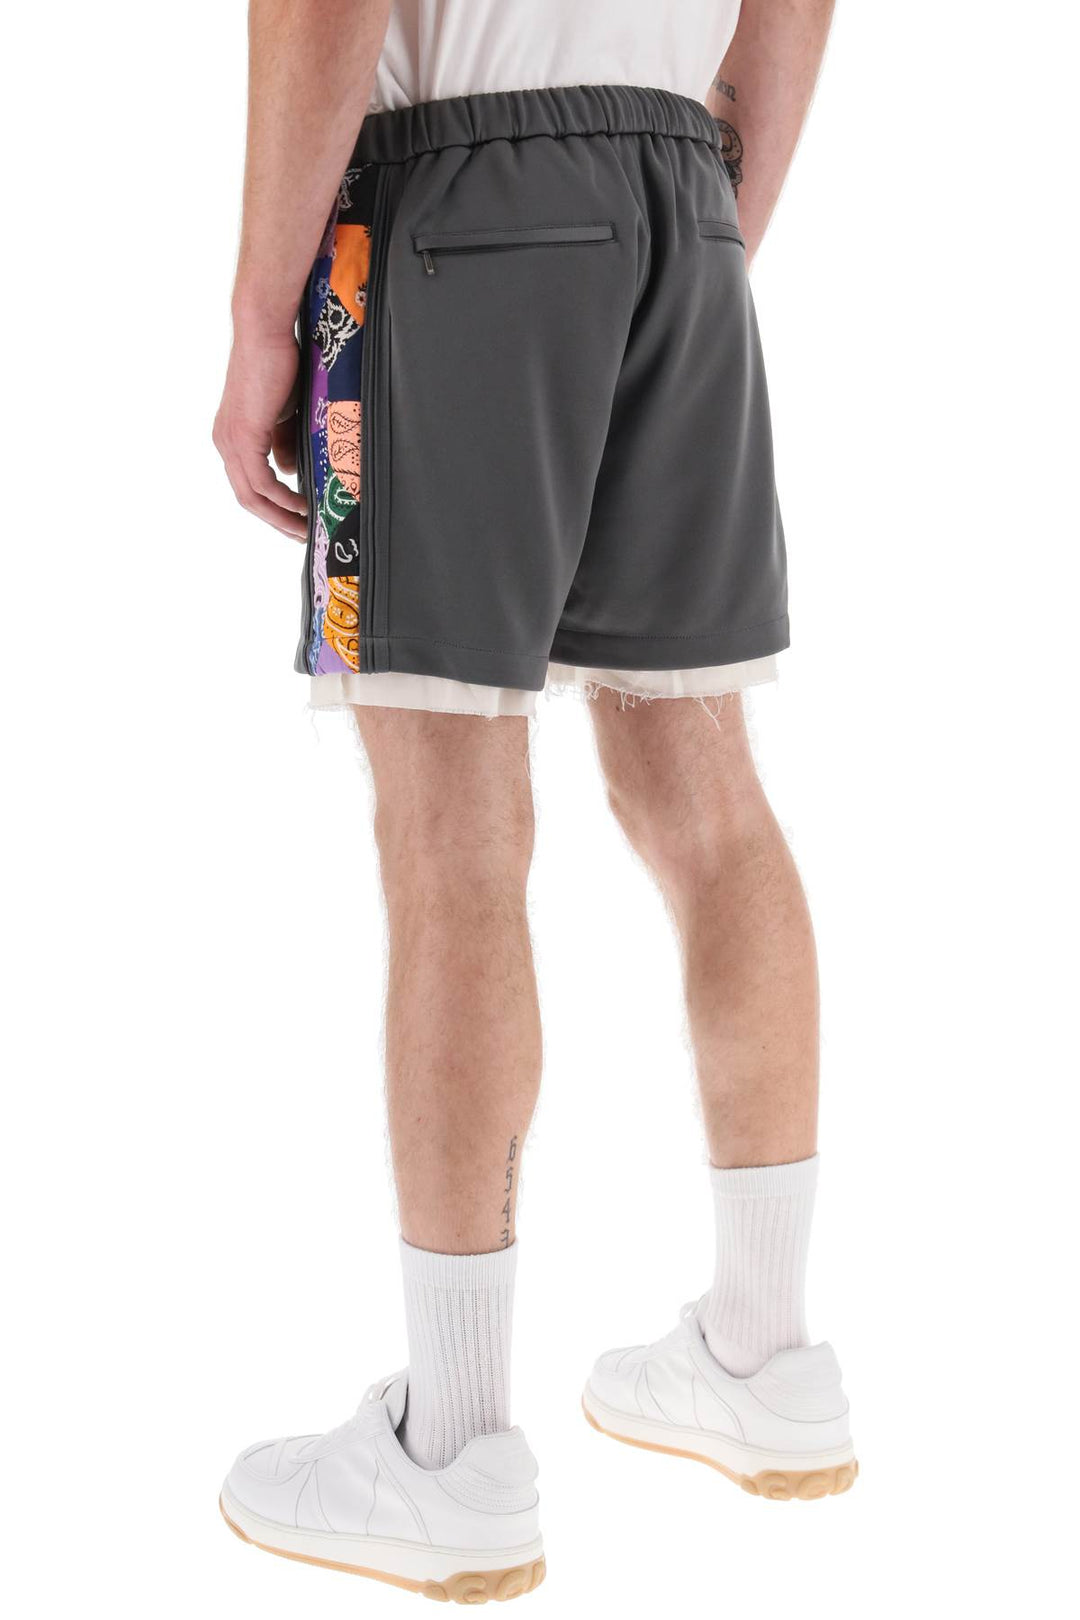 Children of the discordance jersey shorts with bandana bands-2